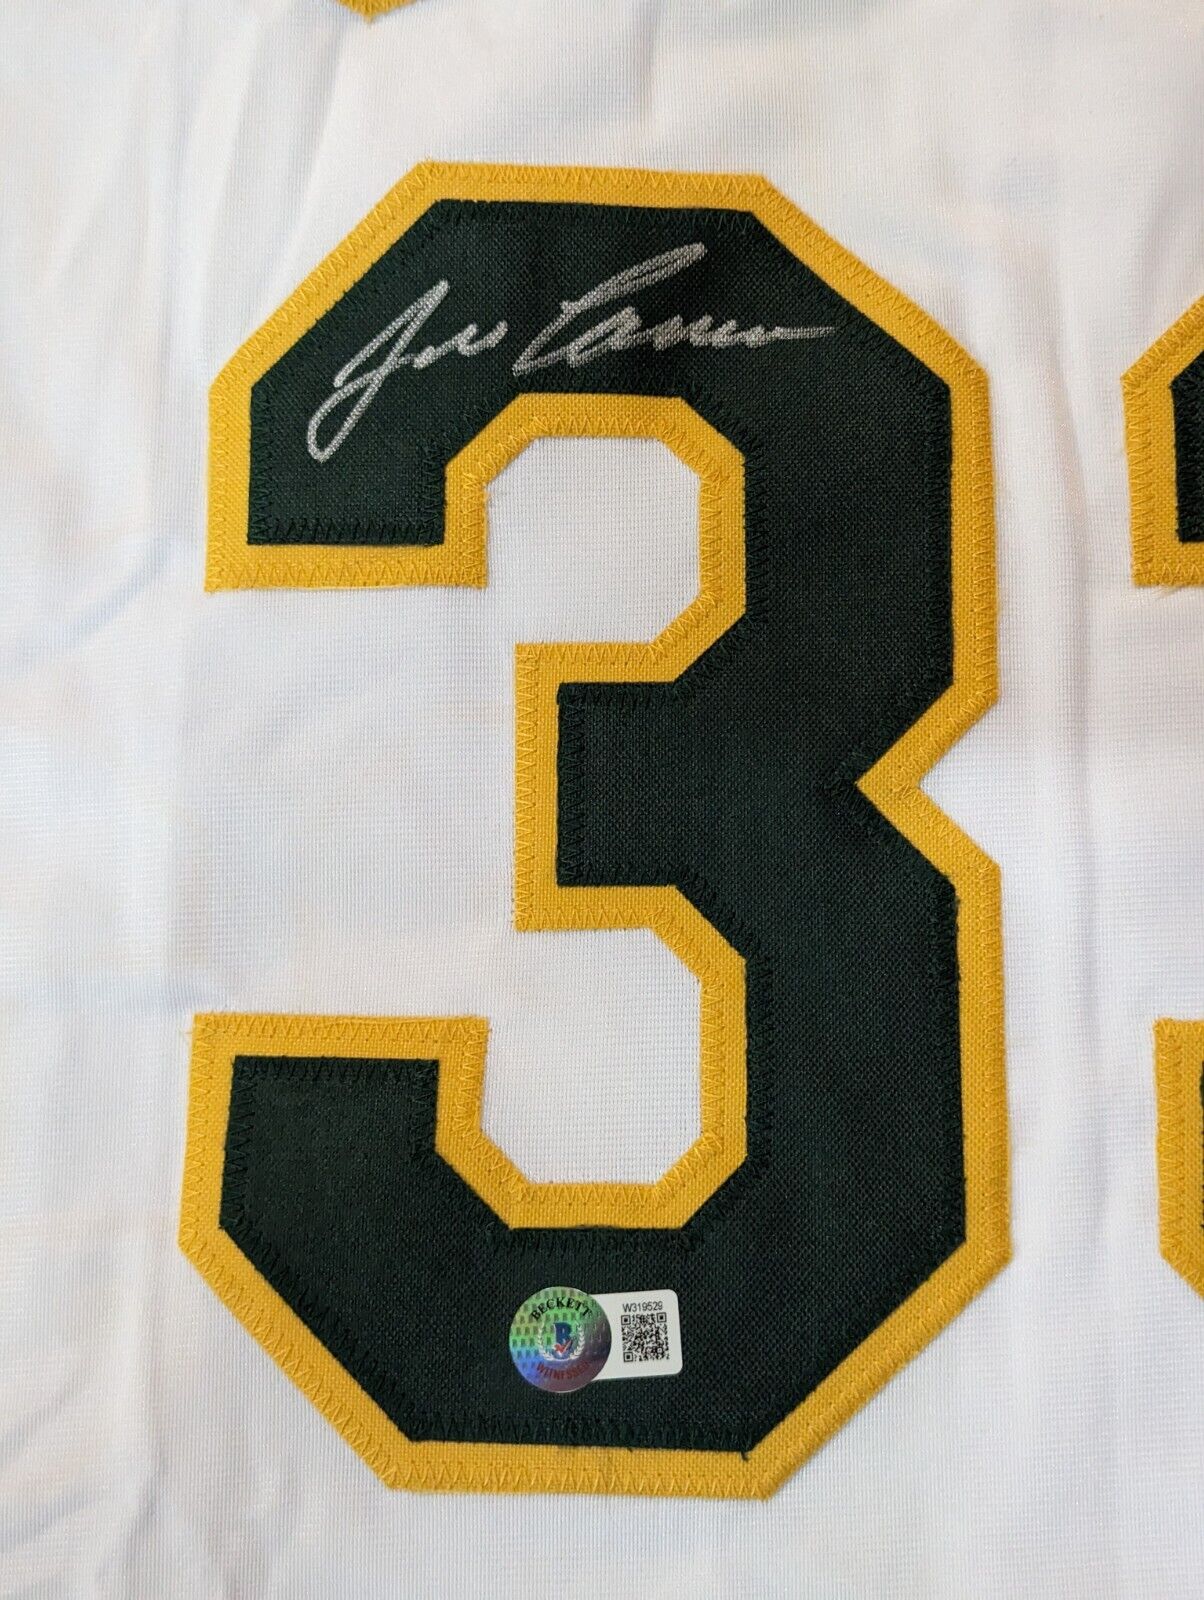 Jose Canseco Autographed Yellow Baseball Jersey: BM Authentics